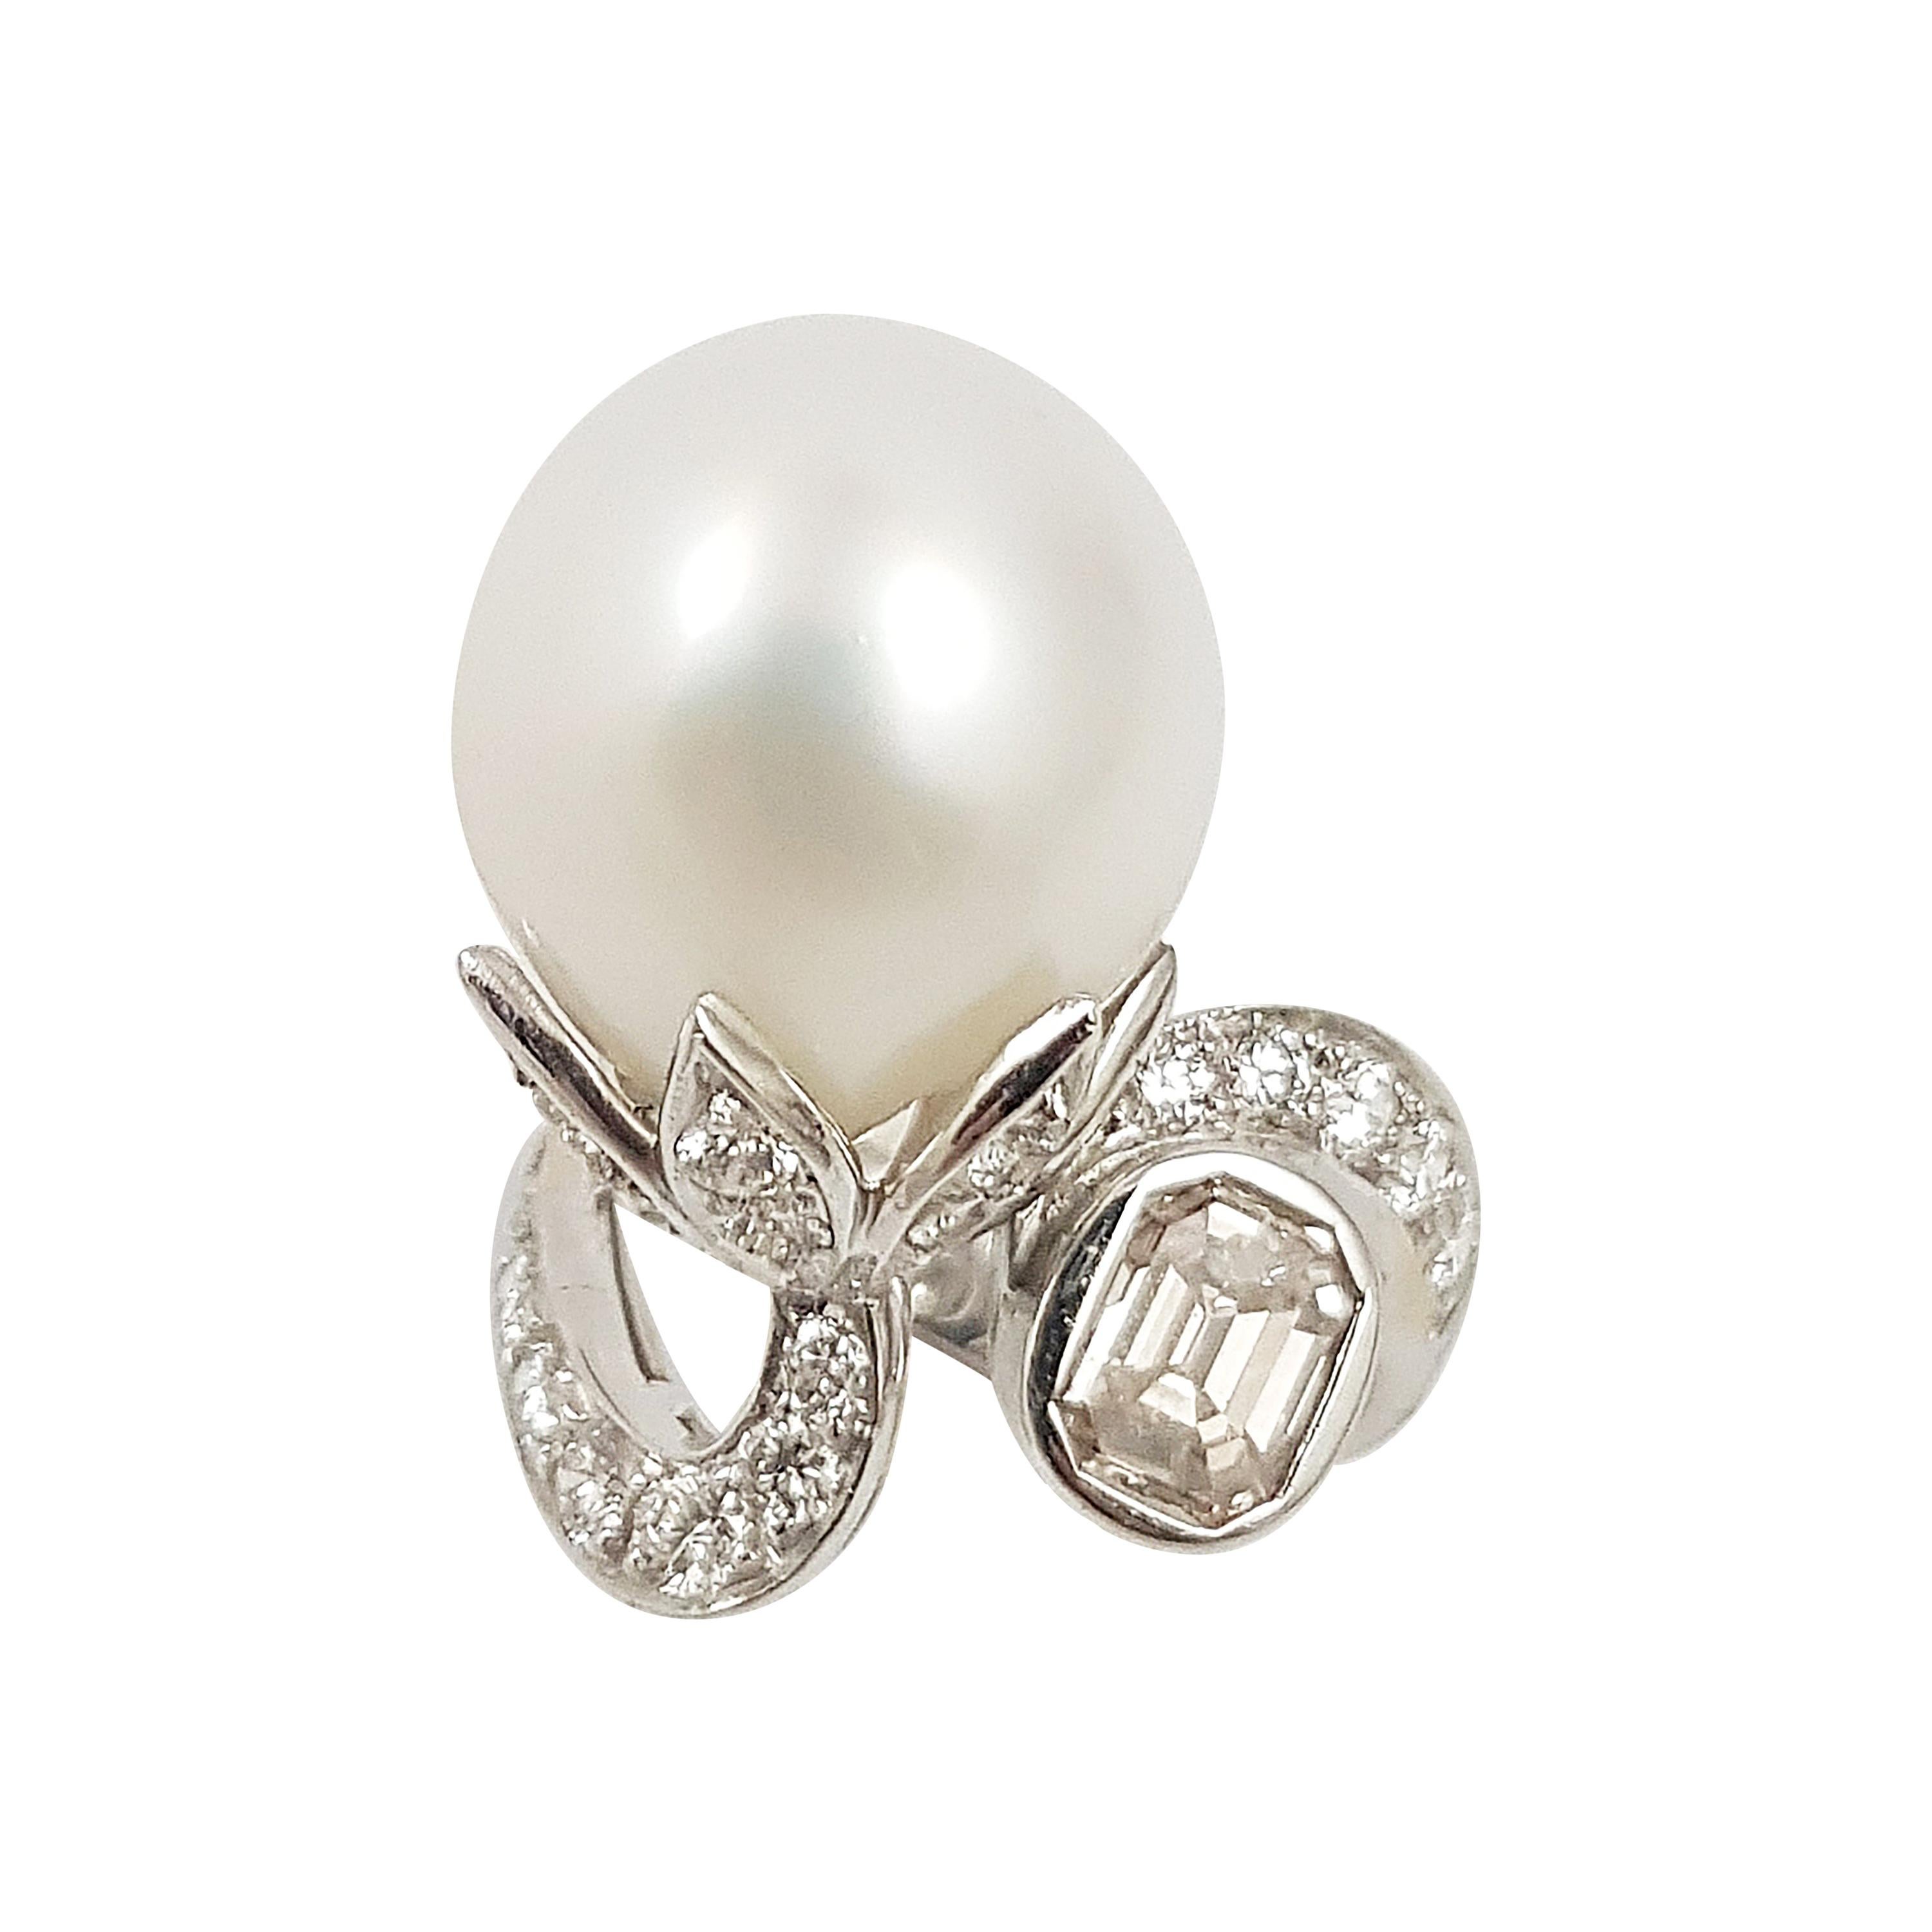 South Sea Pearl with Brown Diamond and Diamond Ring Set in 18 Karat White Gold 